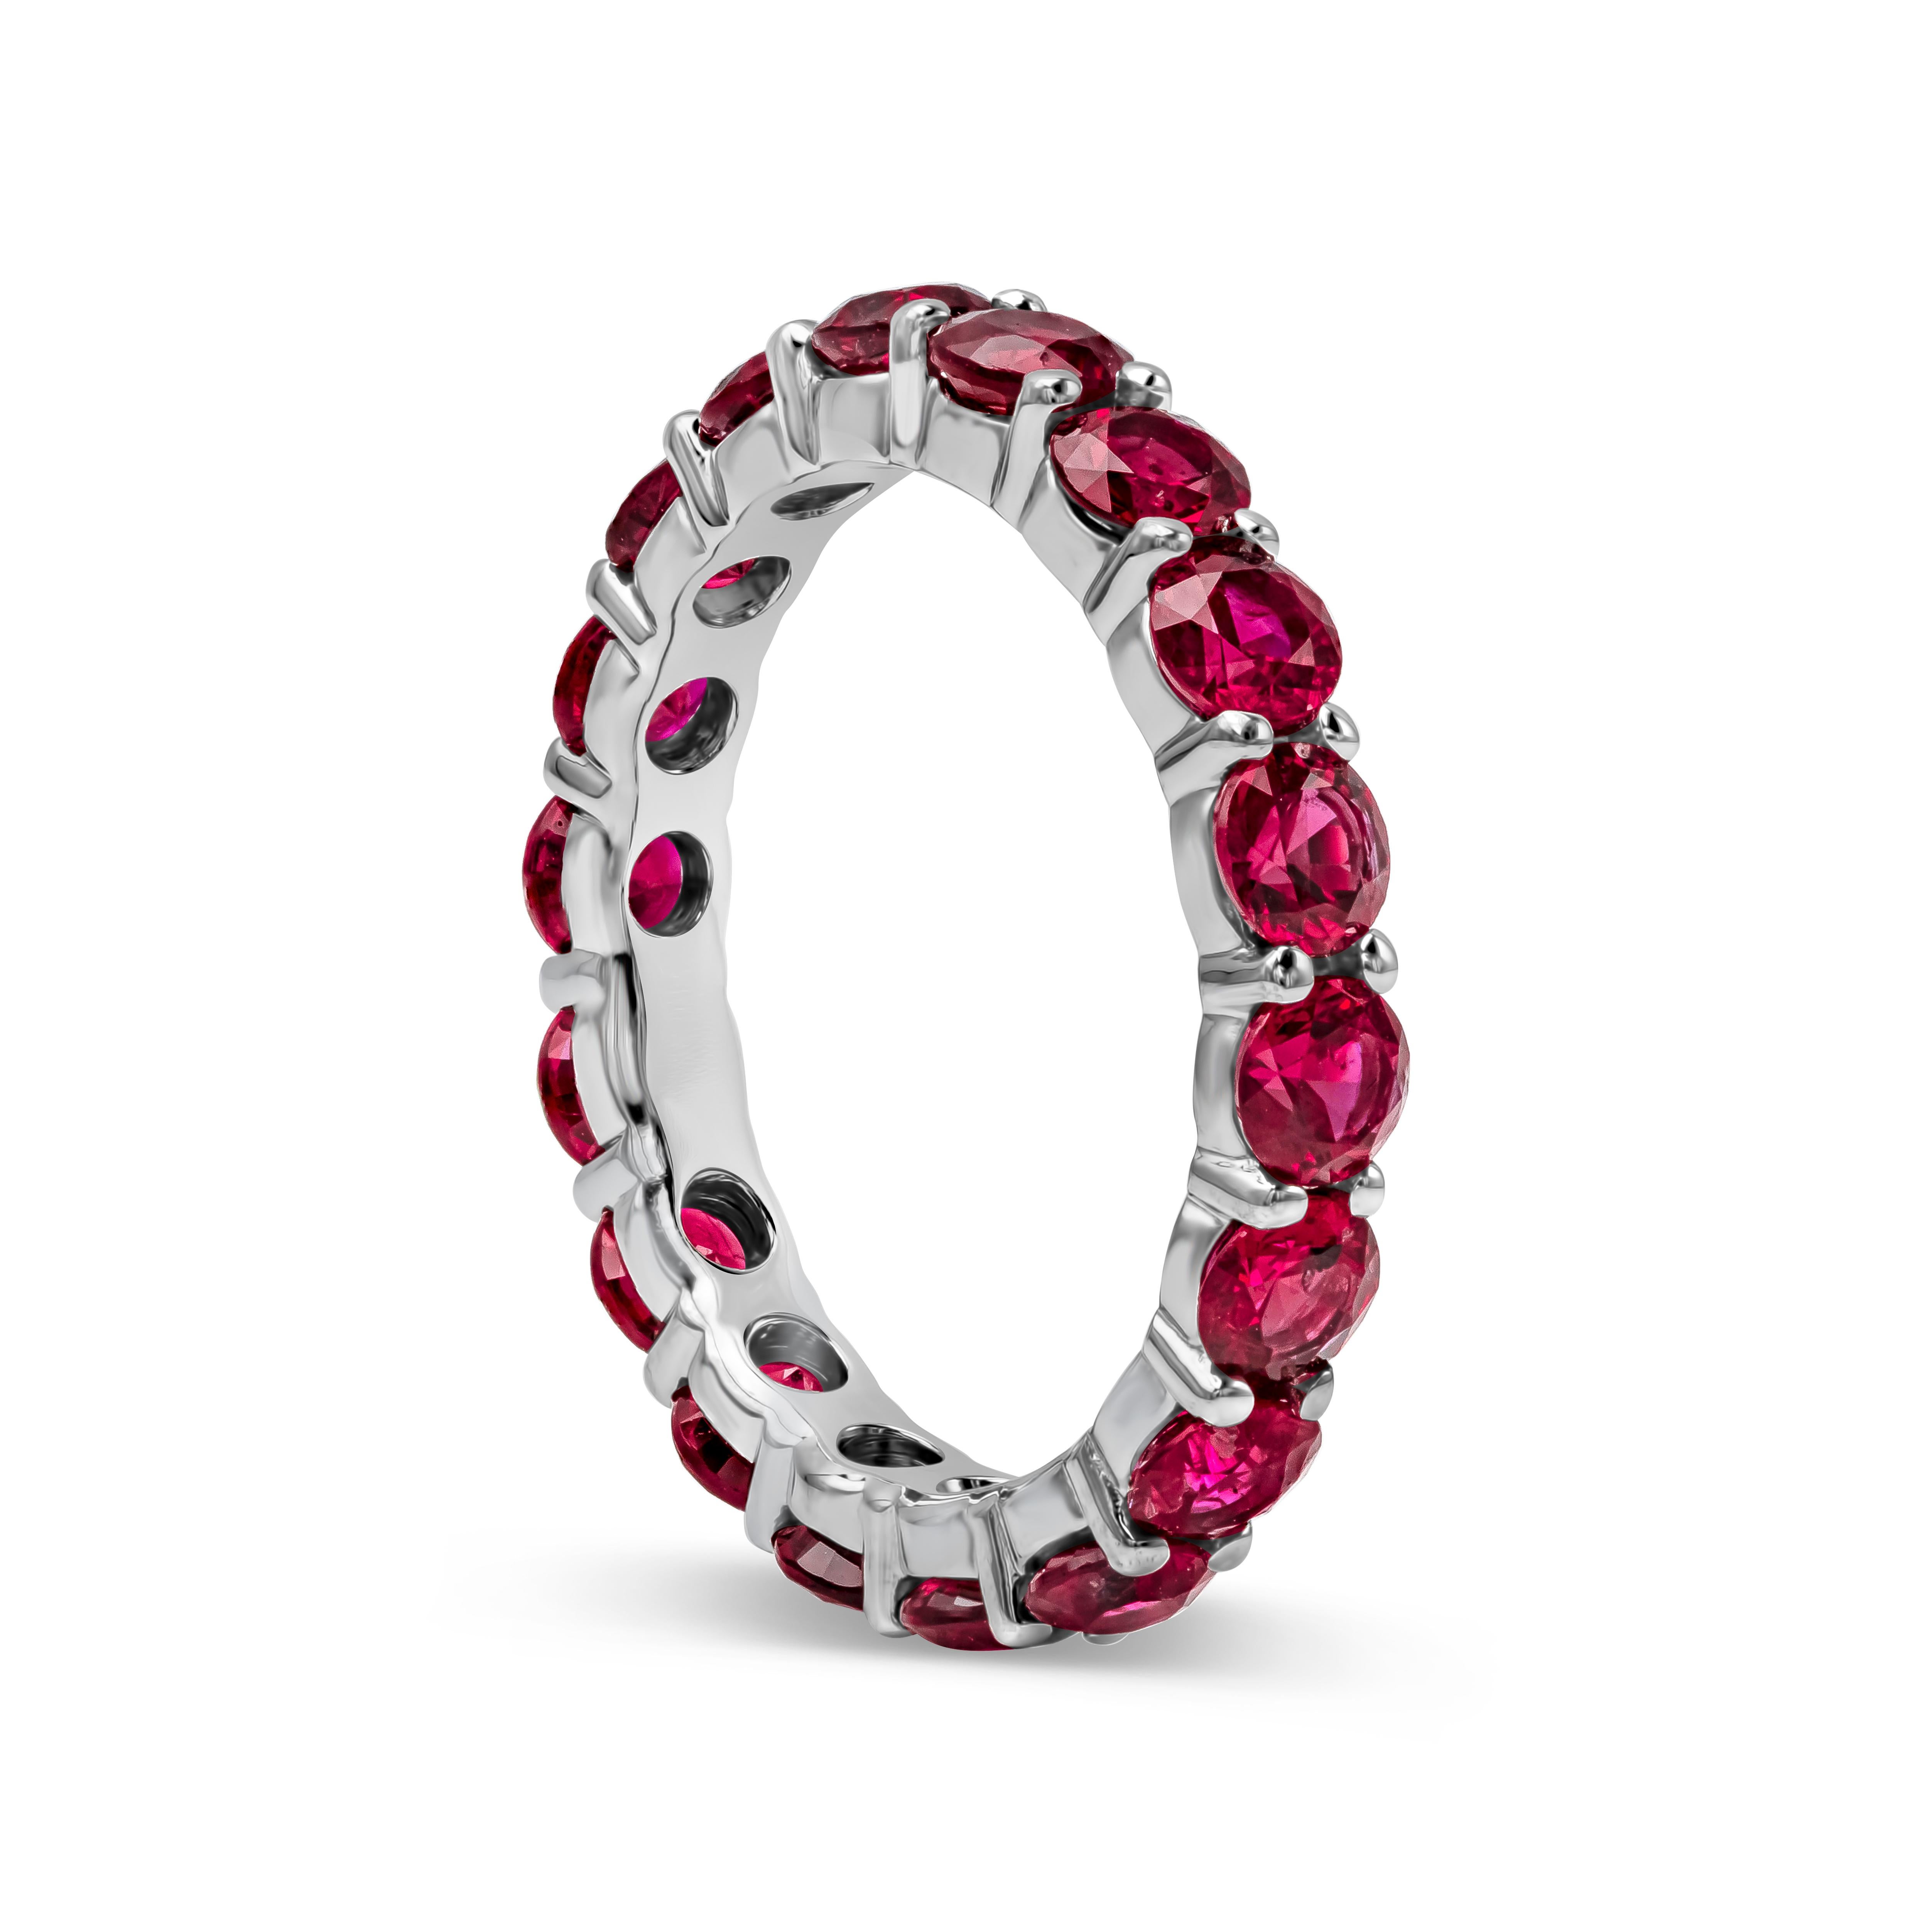 A beautiful and stackable wedding band ring showcasing a row of color-rich rubies weighing 3.63 carats VS in Clarity. Set in a shared-prong, Made with 18K White Gold, Size 6 US.

Style available in different price ranges. Prices are based on size,